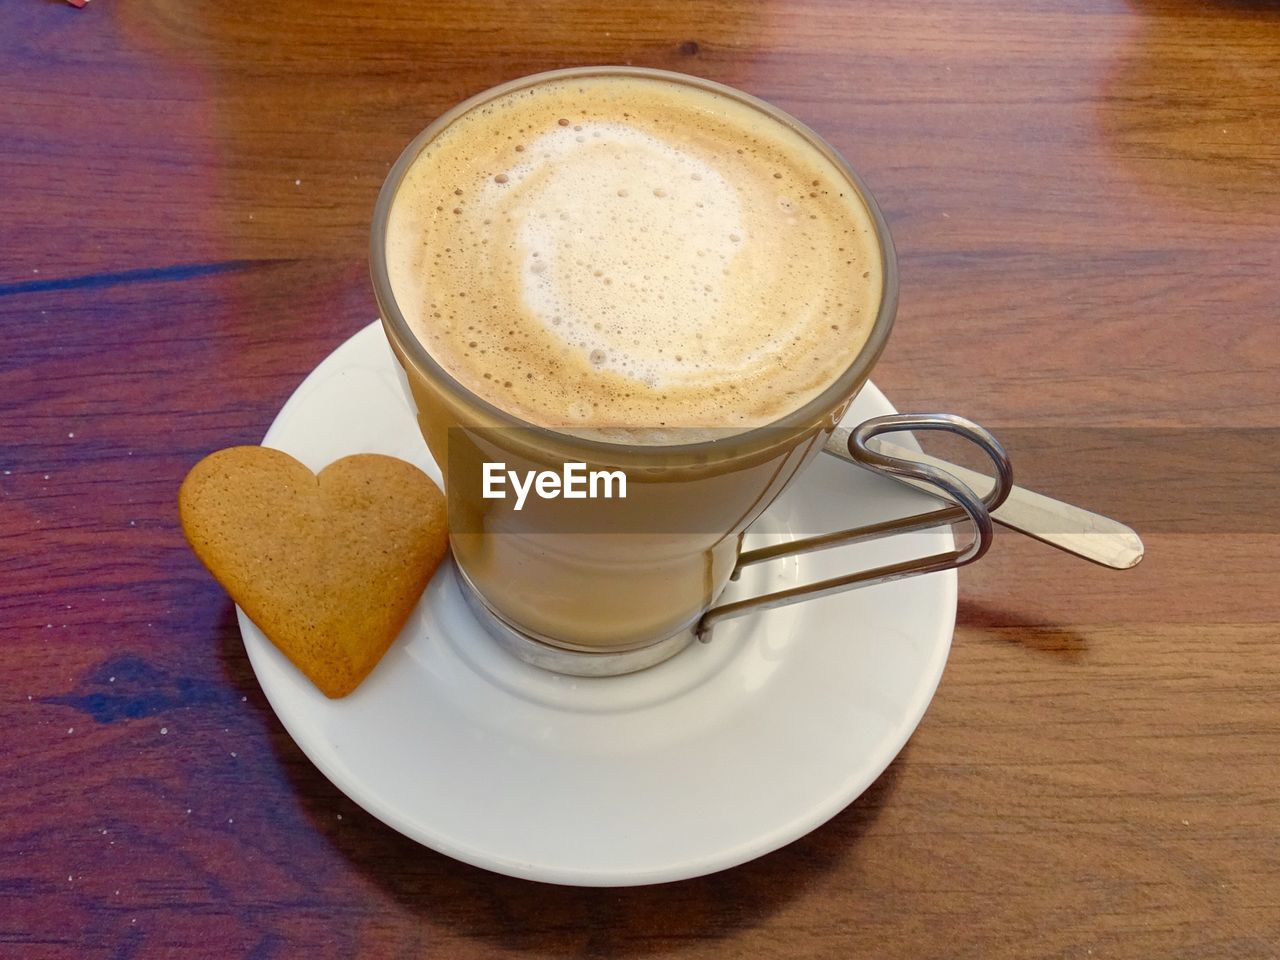 Love coffee with heart shaped biscuit